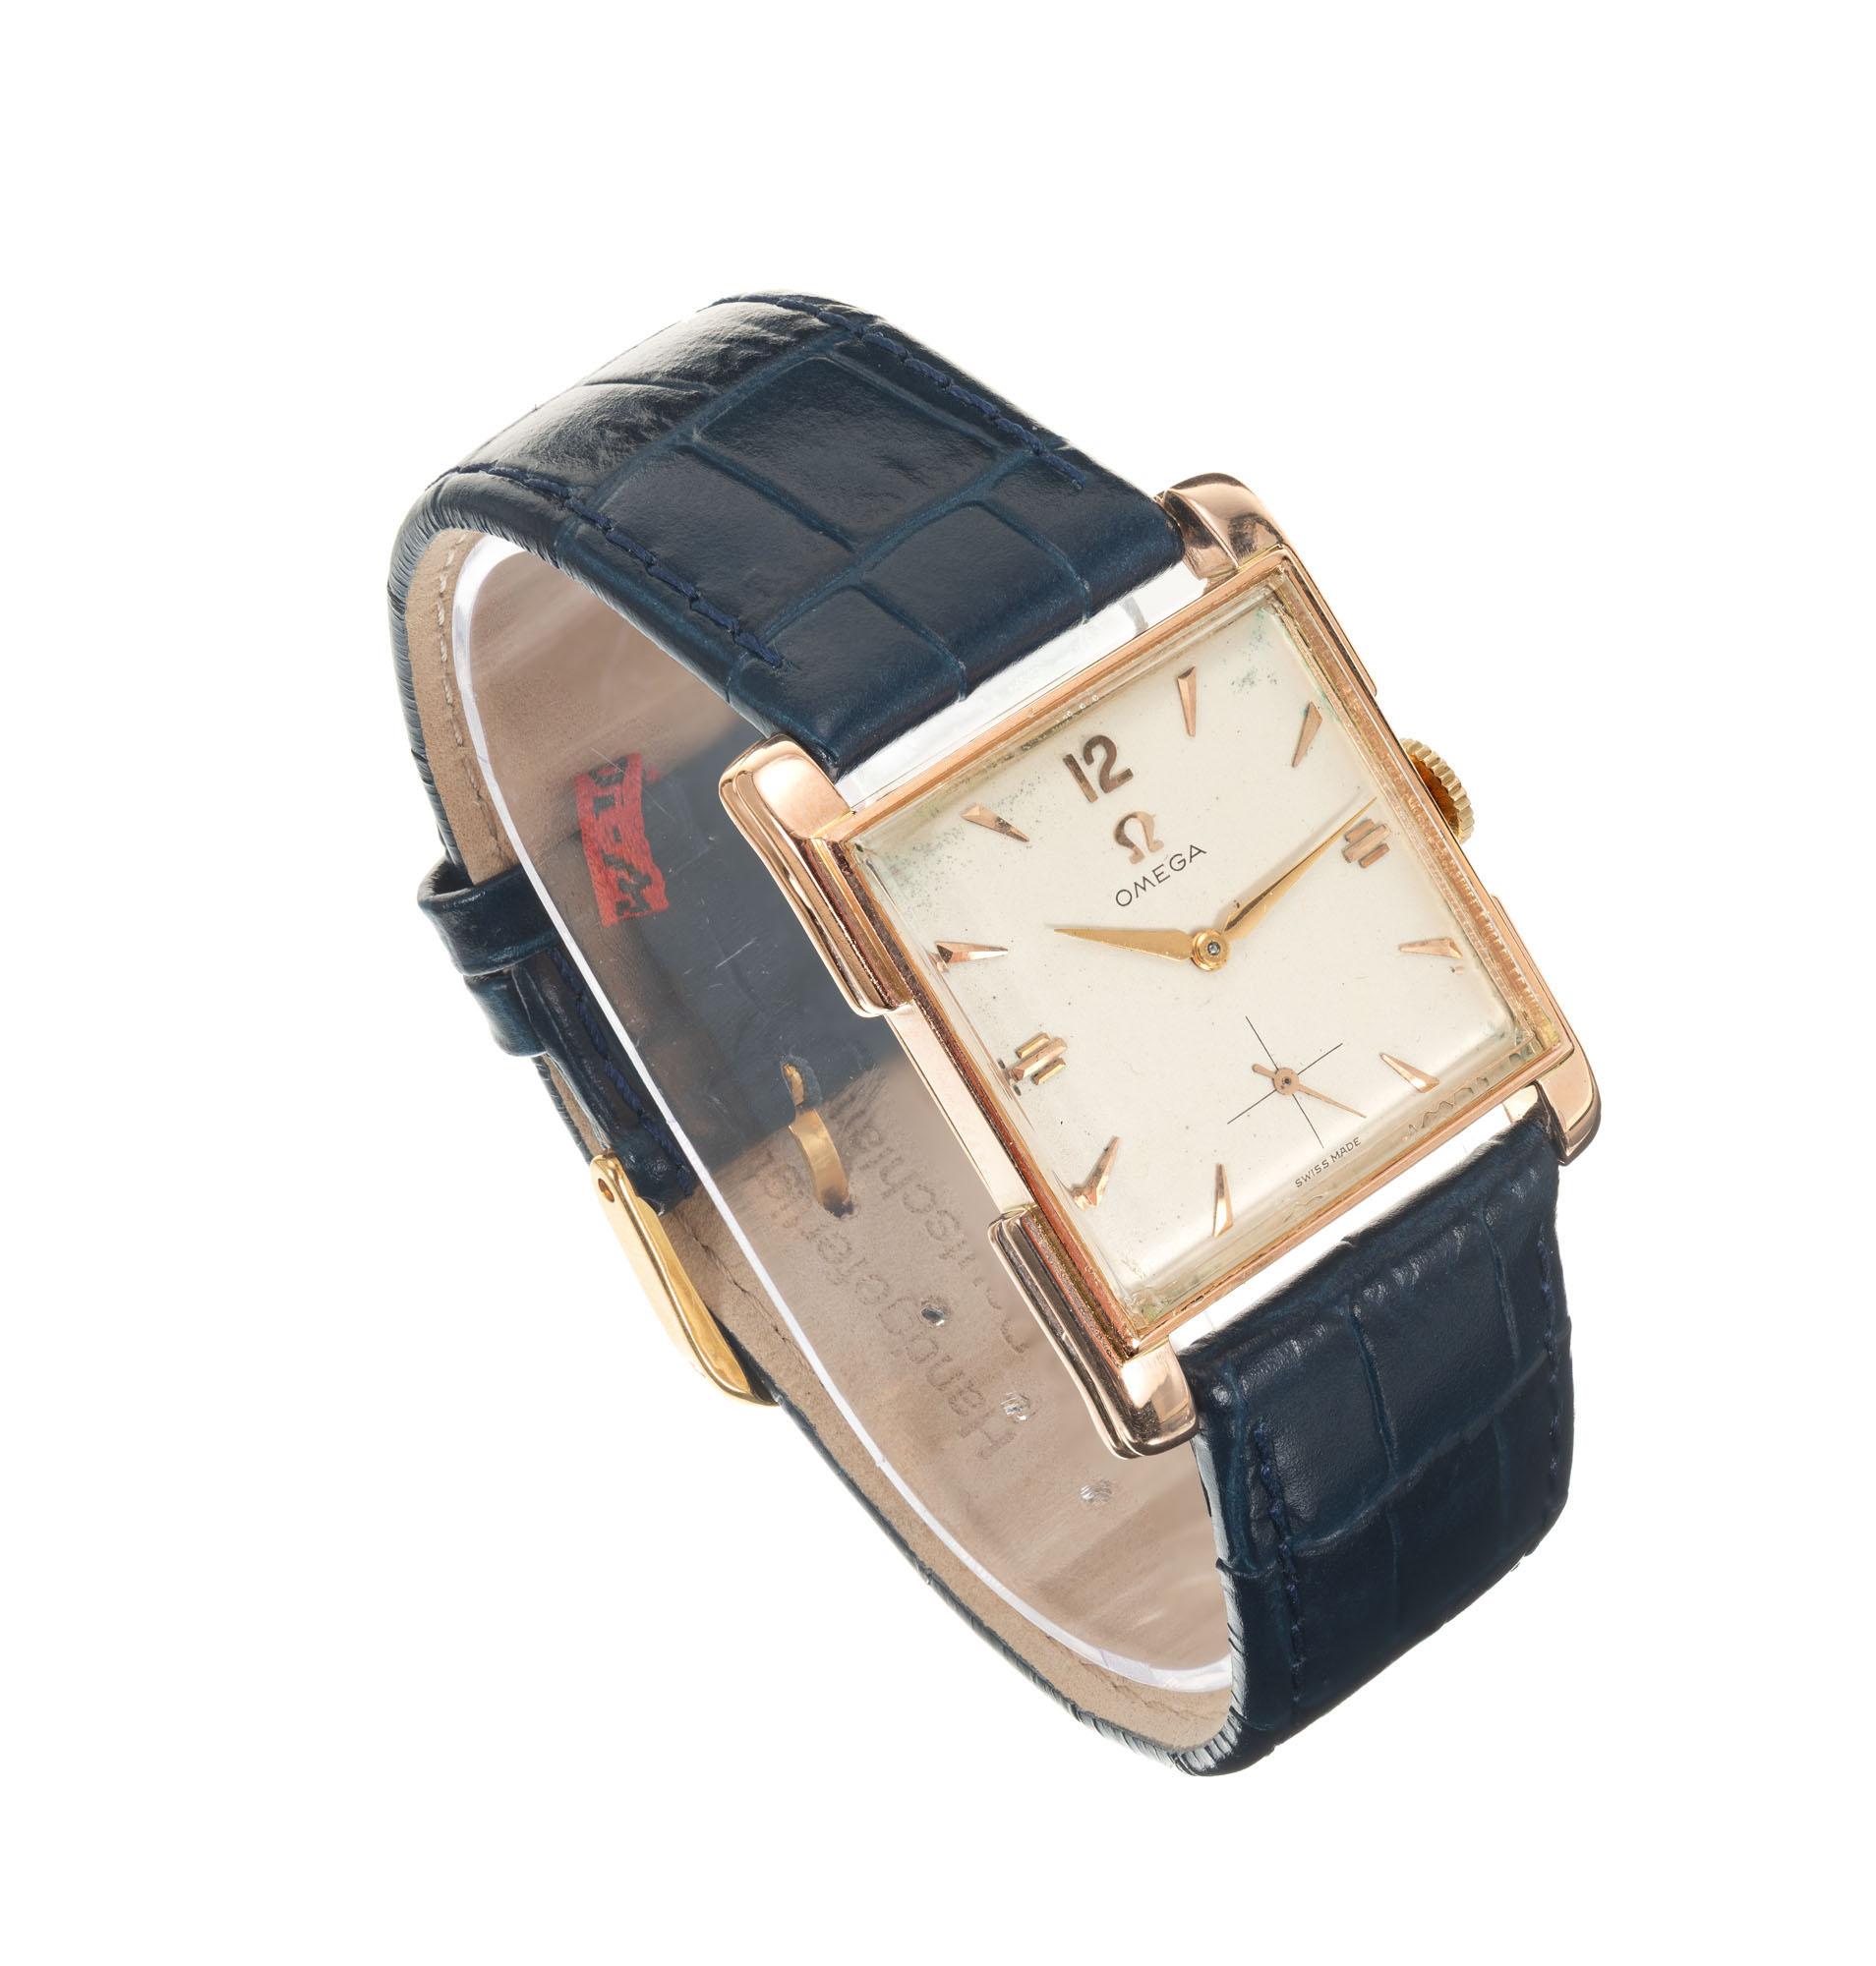 Mens Omega 194o's 14 Rose Gold manual wind 17 jewel wristwatch. Rectangular retro design case 

Length: 34.19mm
Width: 25.71mm
Band width at case: 20mm
Case thickness: 6.51mm
Band: blue leather new
Crystal: Acrylic
Dial: Parchment 
Inside case: 14k